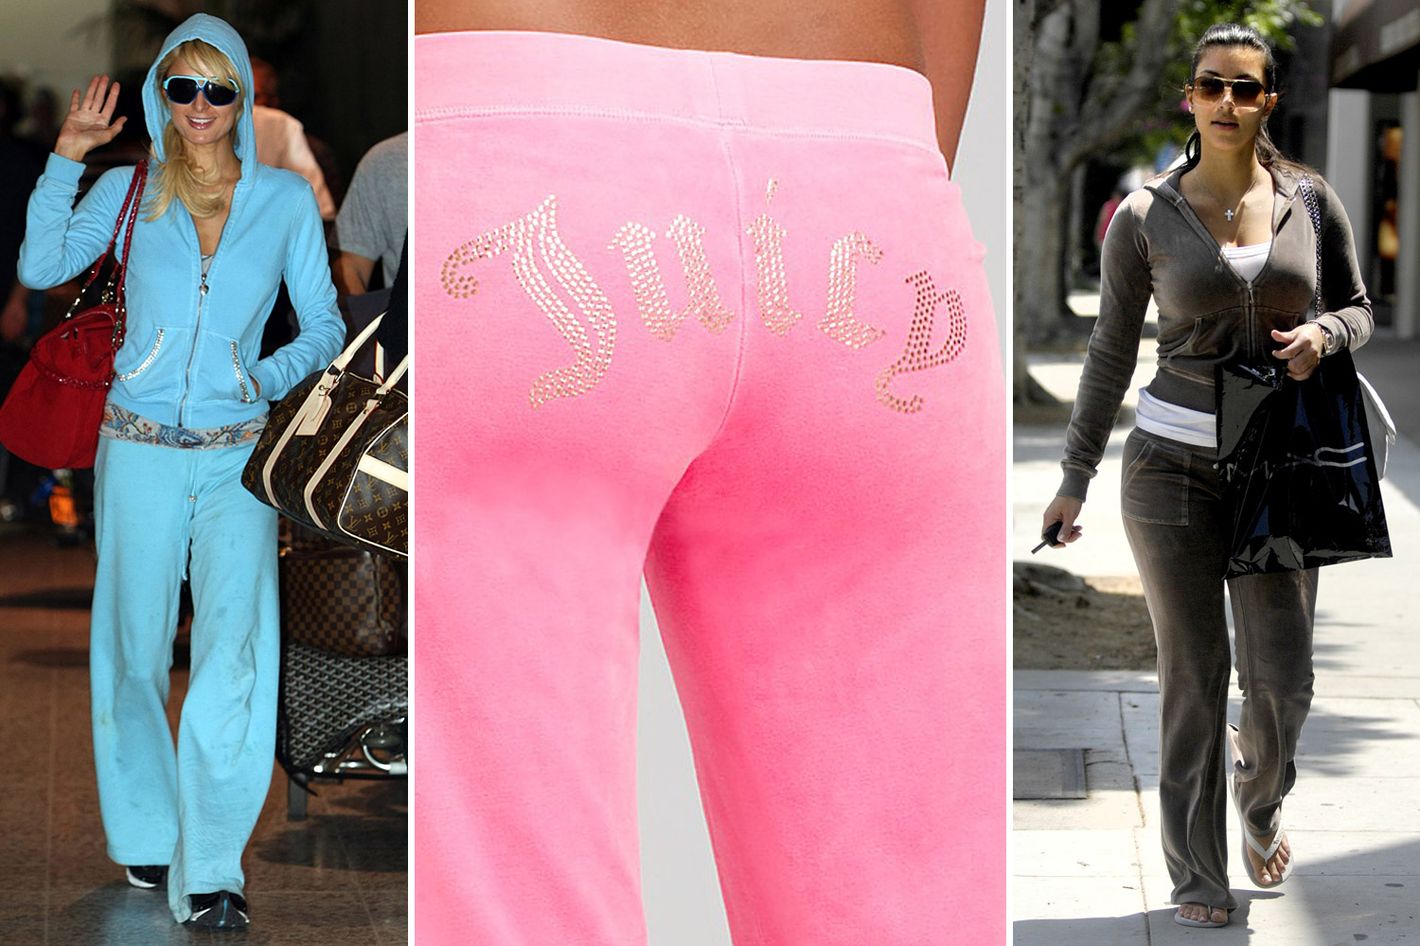 RIP, Juicy Tracksuits, Famewhore Uniform of the 2000s